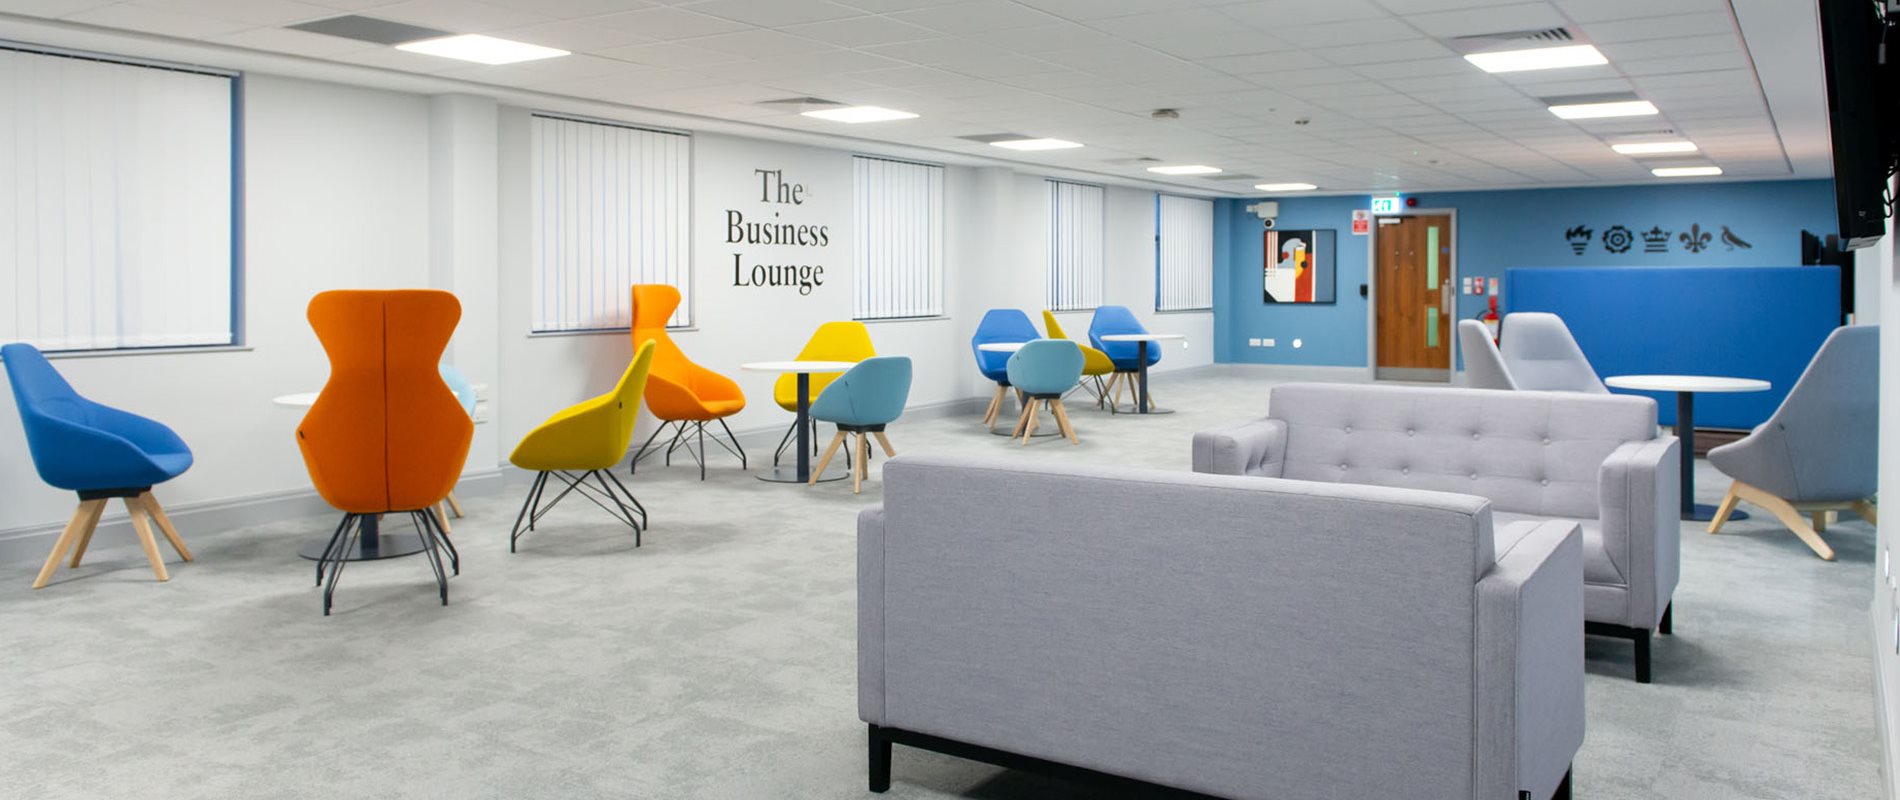 business-lounge-cropped-1900x800